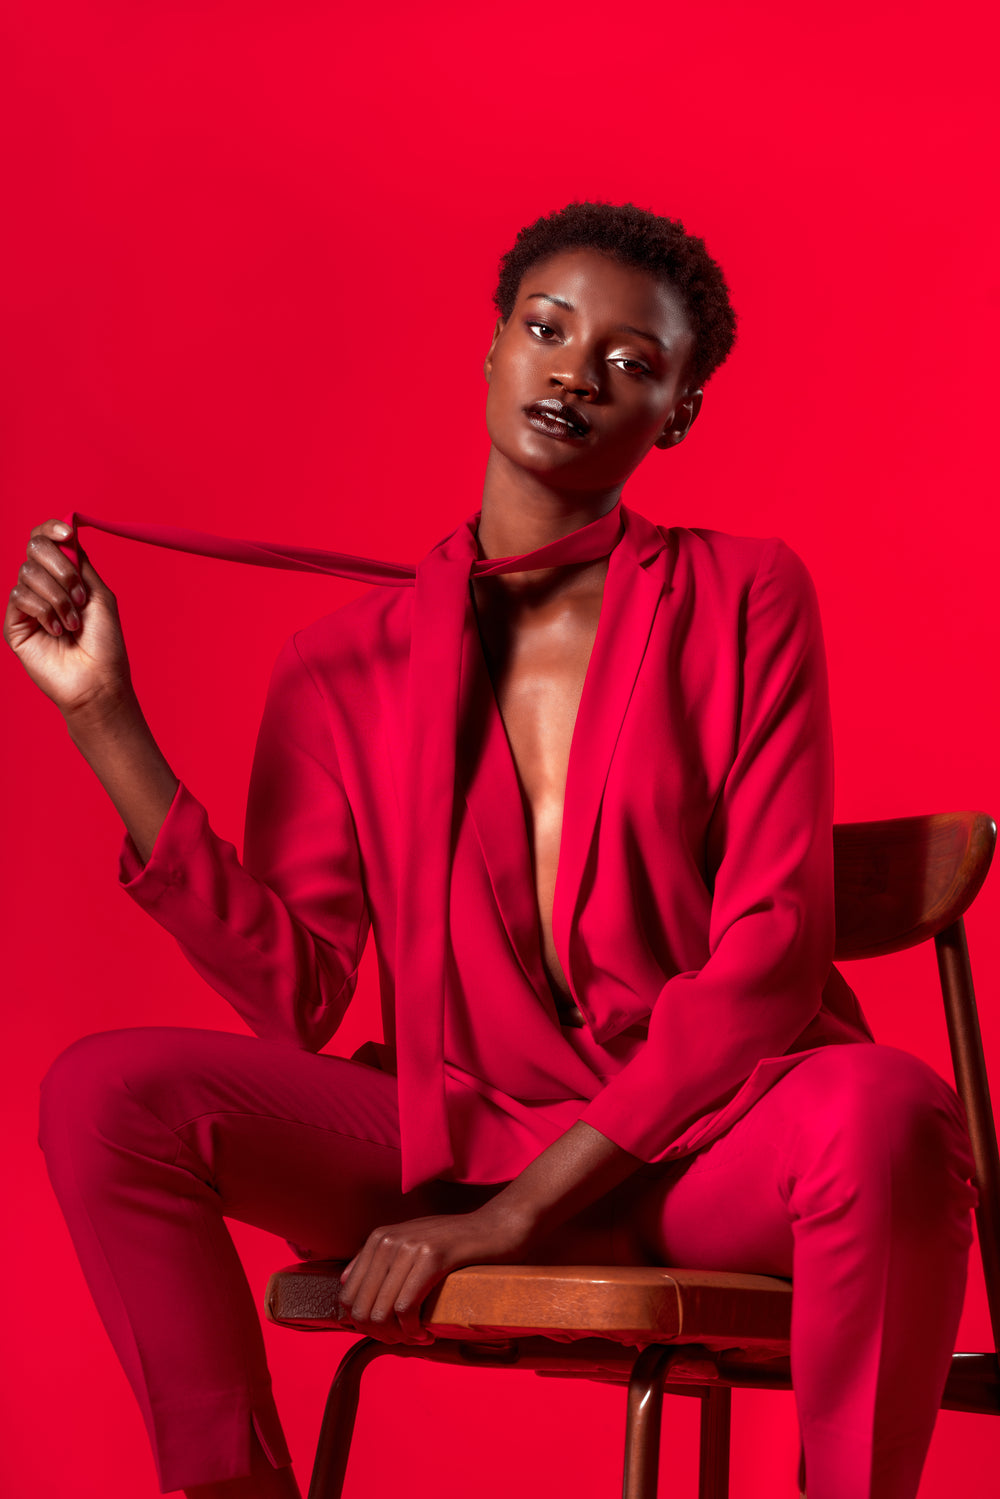 high fashion model in red suit